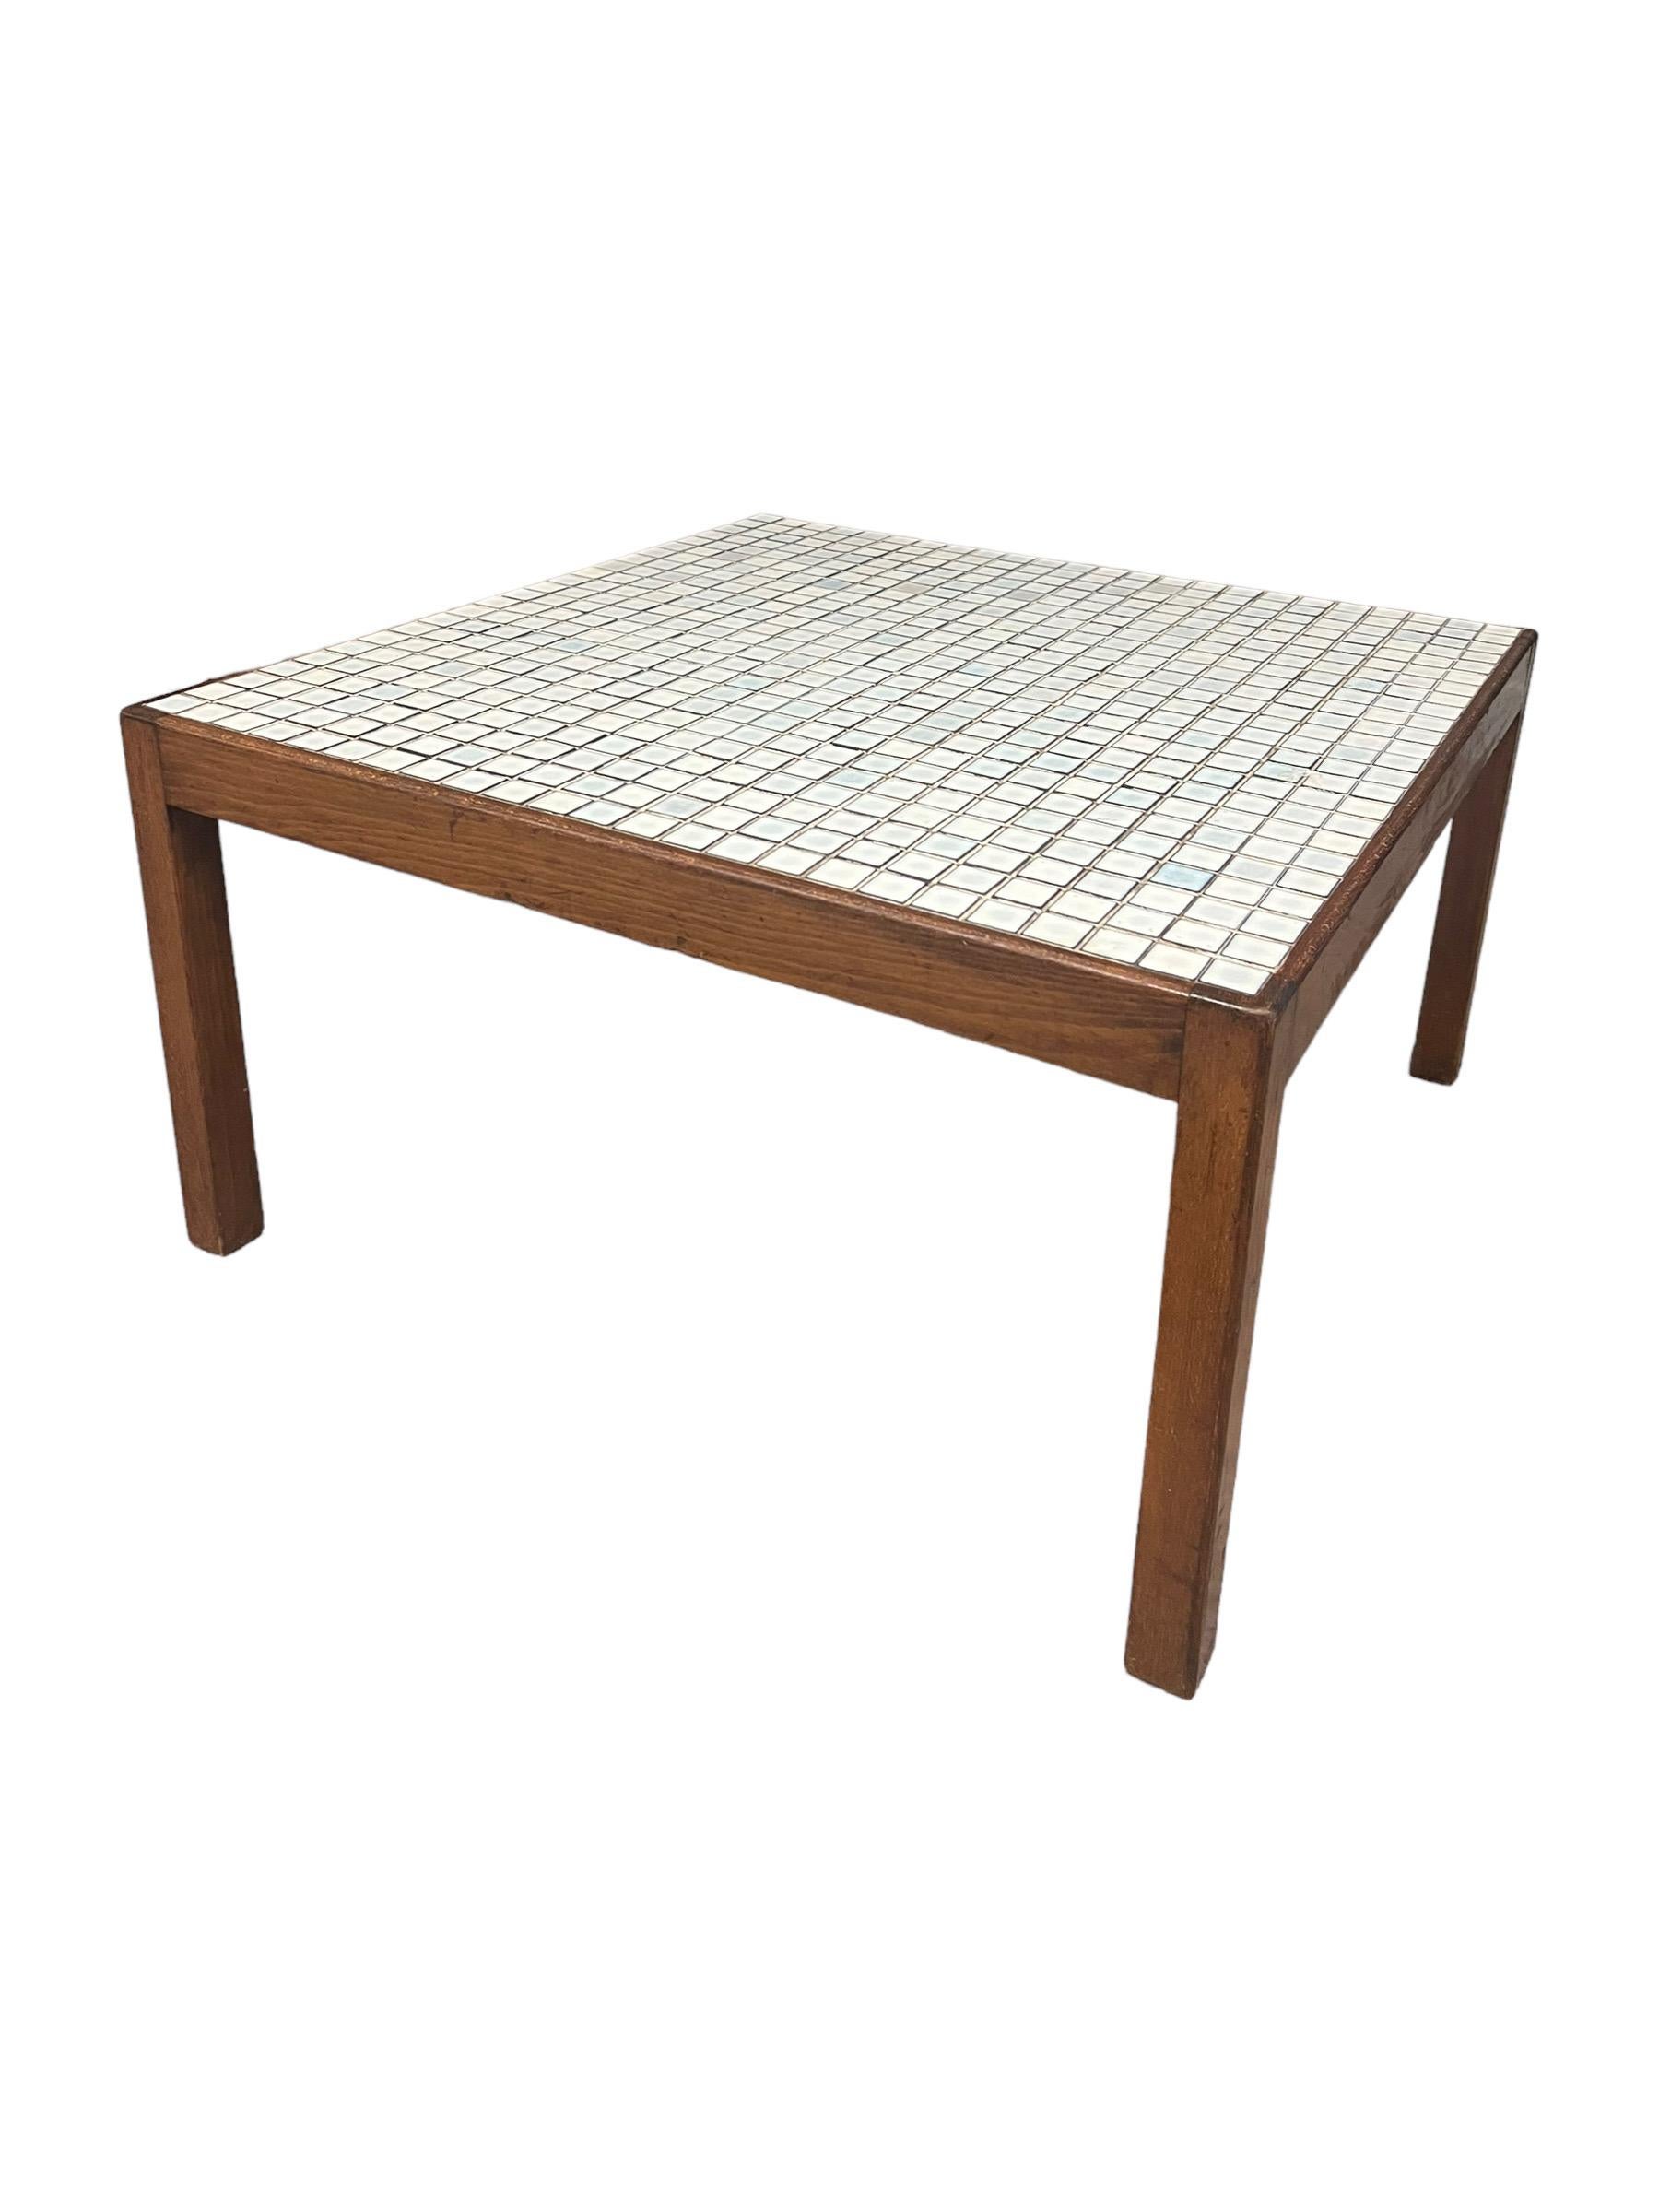 Vintage Mid Century Modern Walnut Table With Tile Top For Sale 1